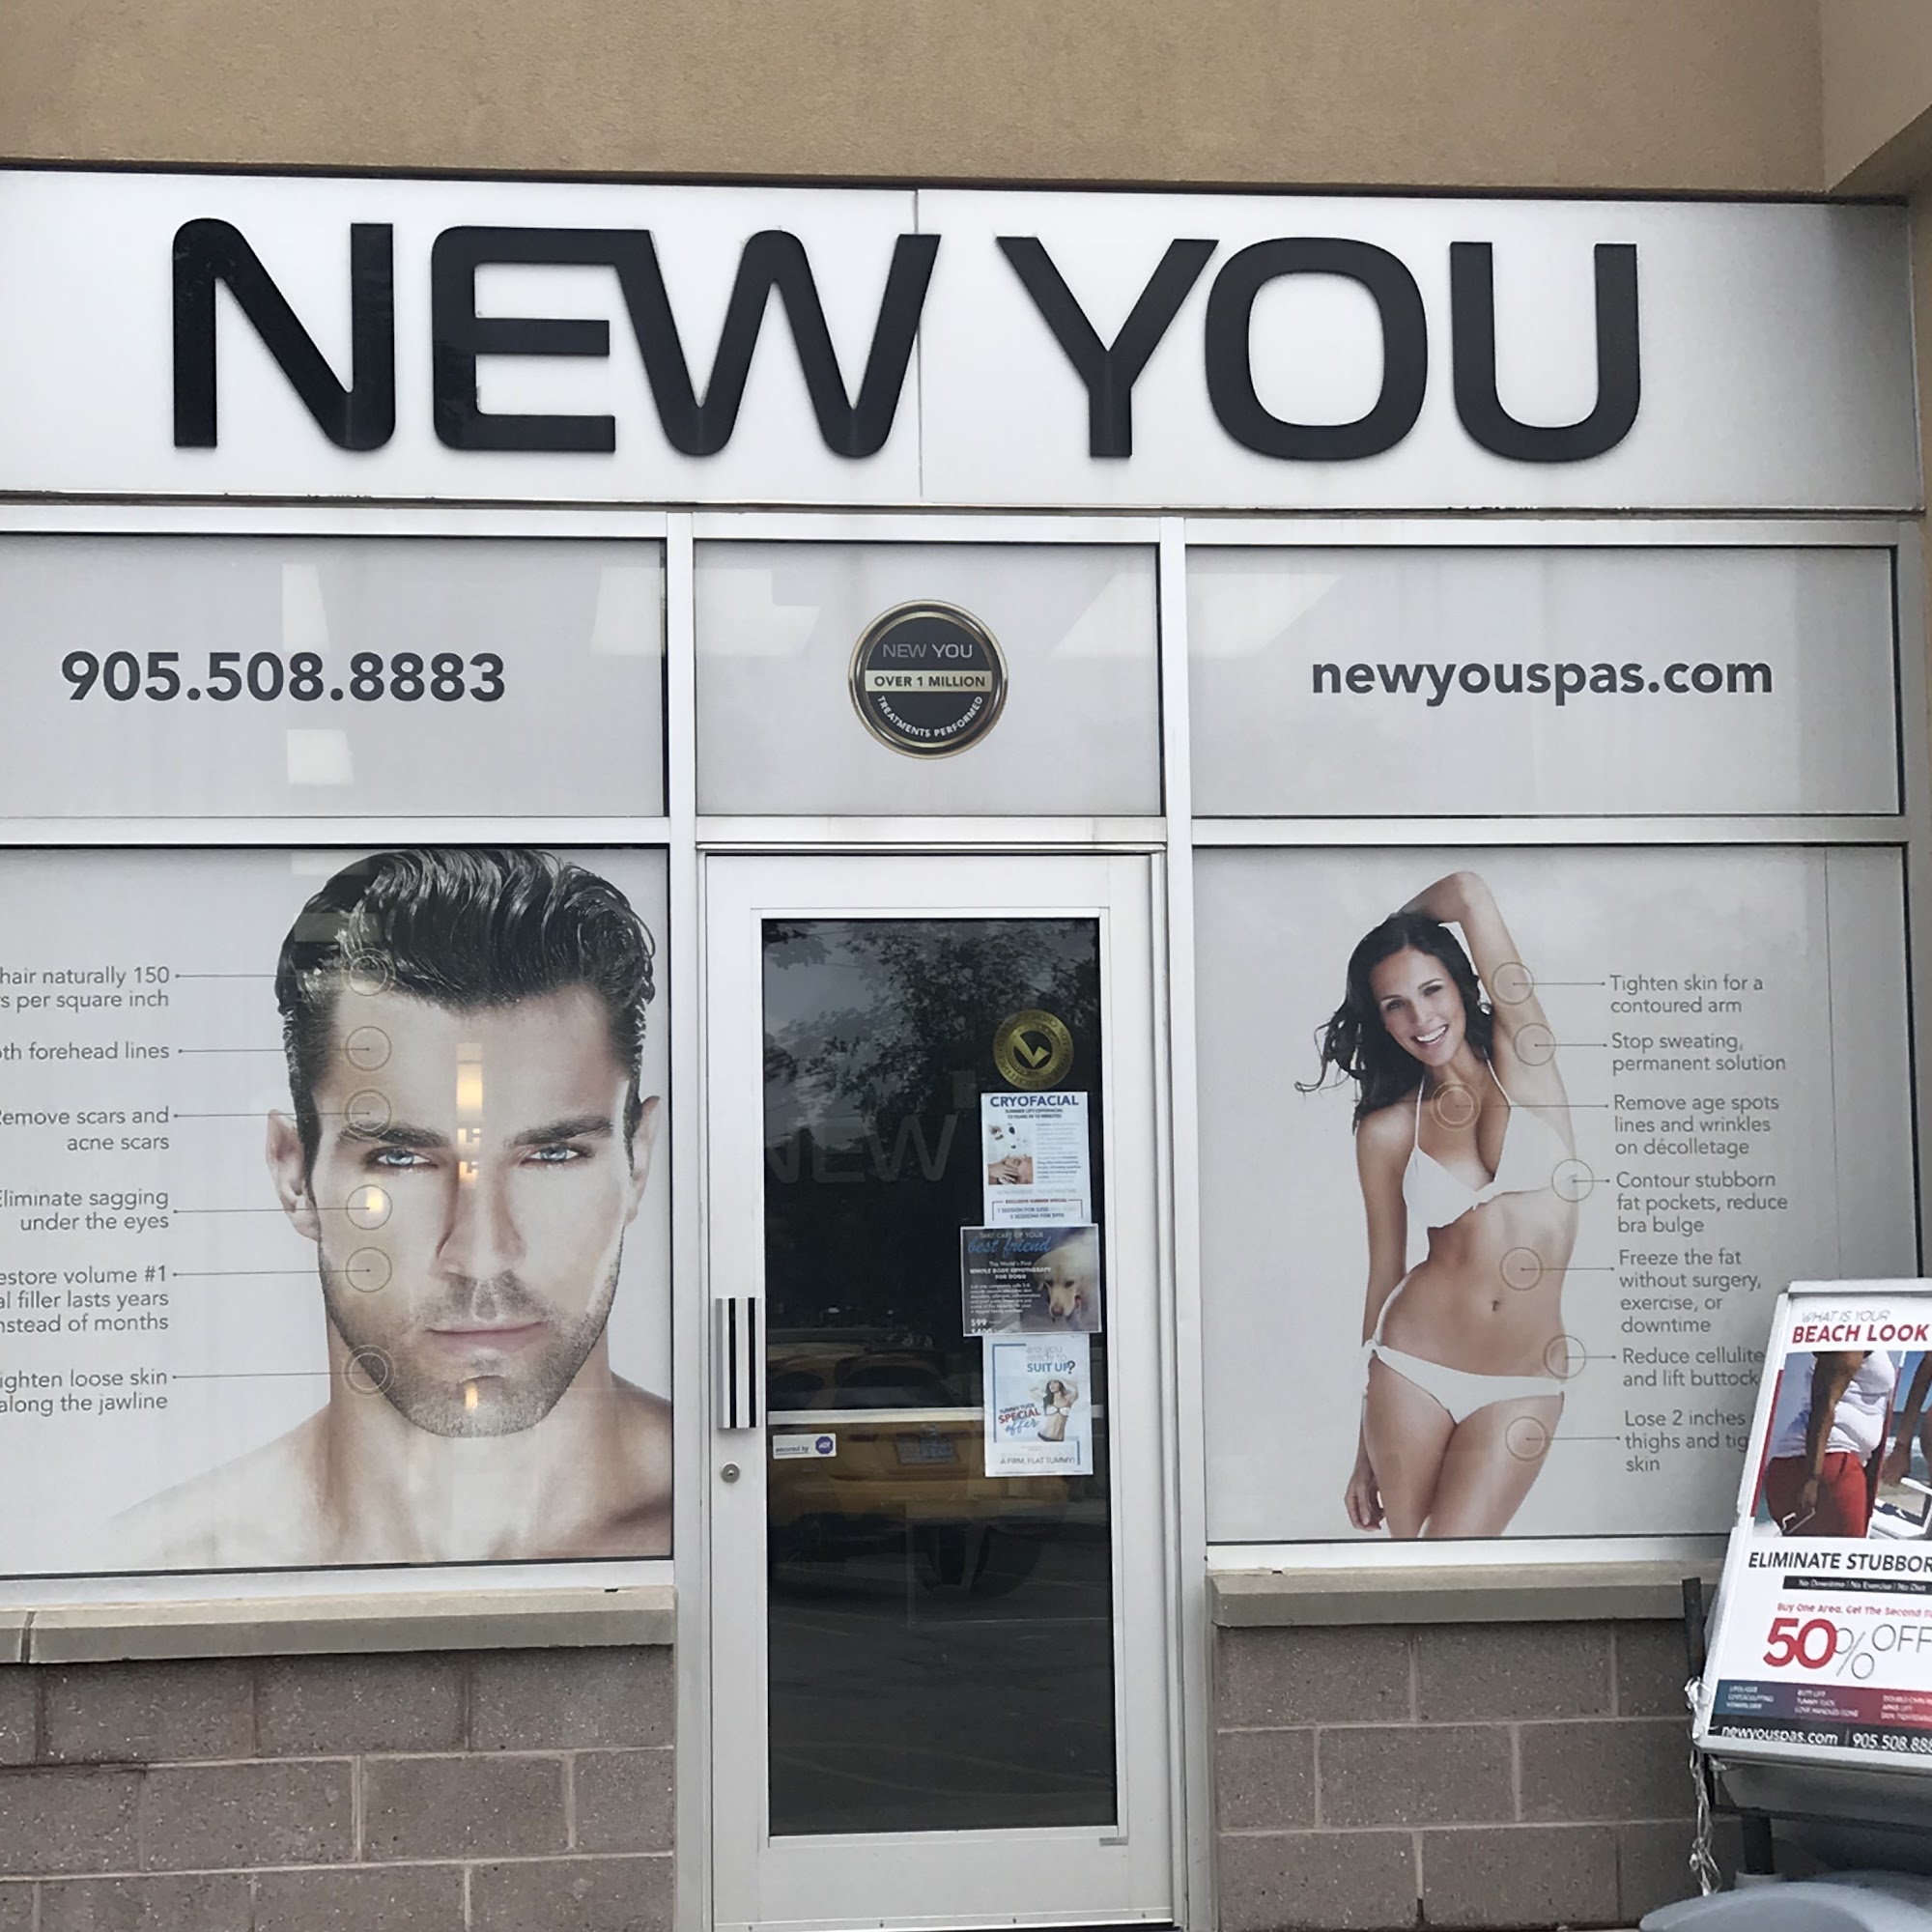 MedSpa Richmond Hill: New You Cosmetic Centre